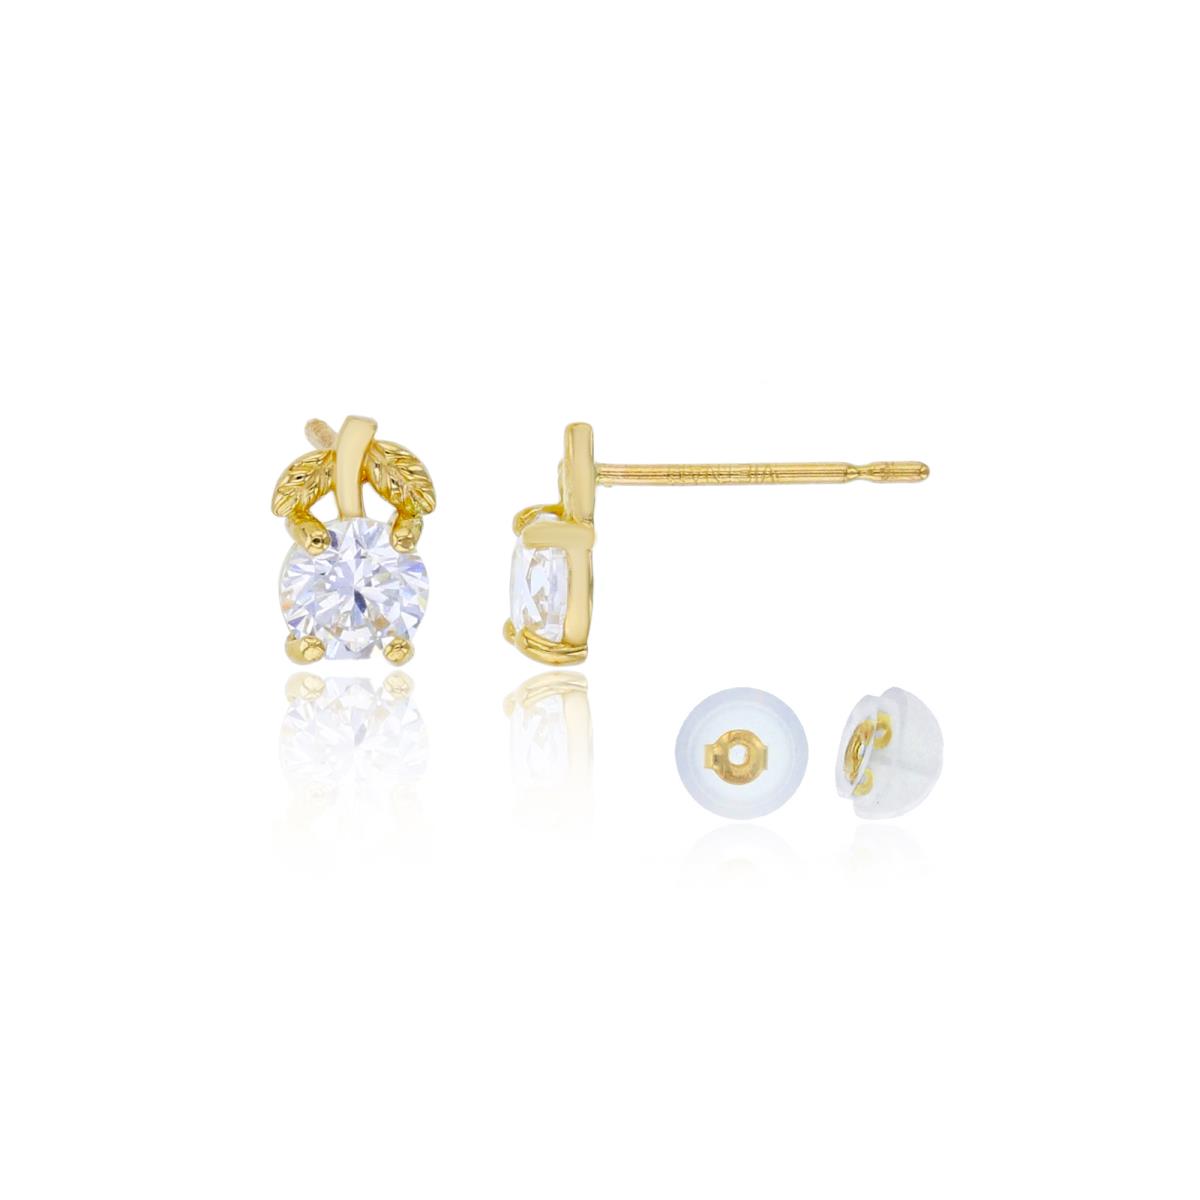 10K Yellow Gold 4mm Round Cut CZ Flower Stud Earring with Silicone Back